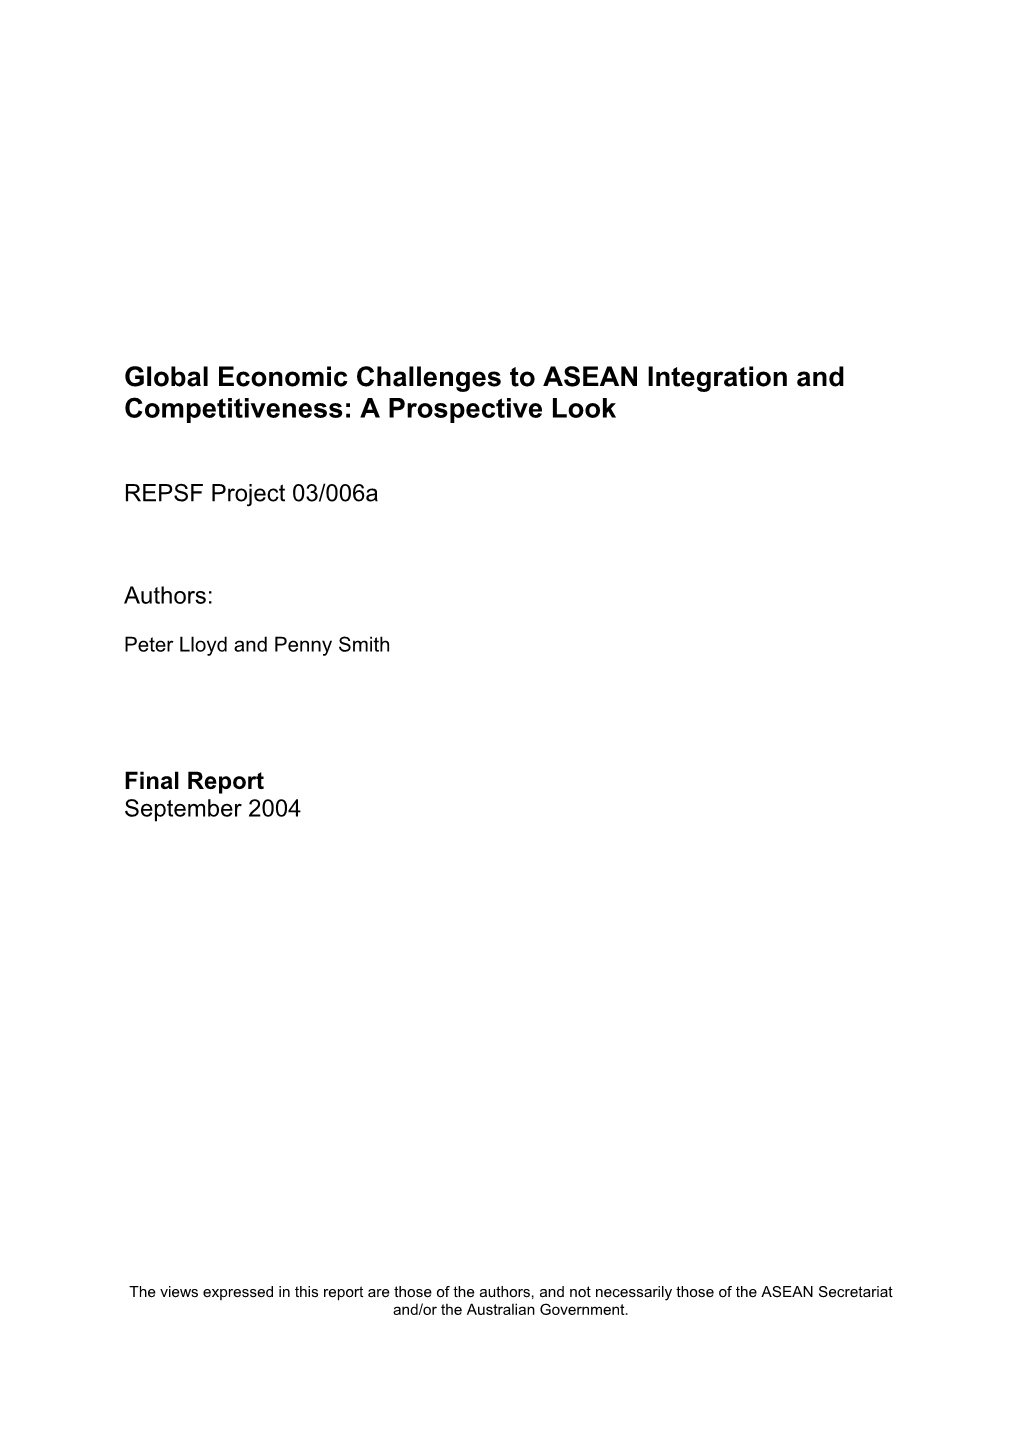 Global Economic Challenges to ASEAN Integration and Competitiveness: a Prospective Look